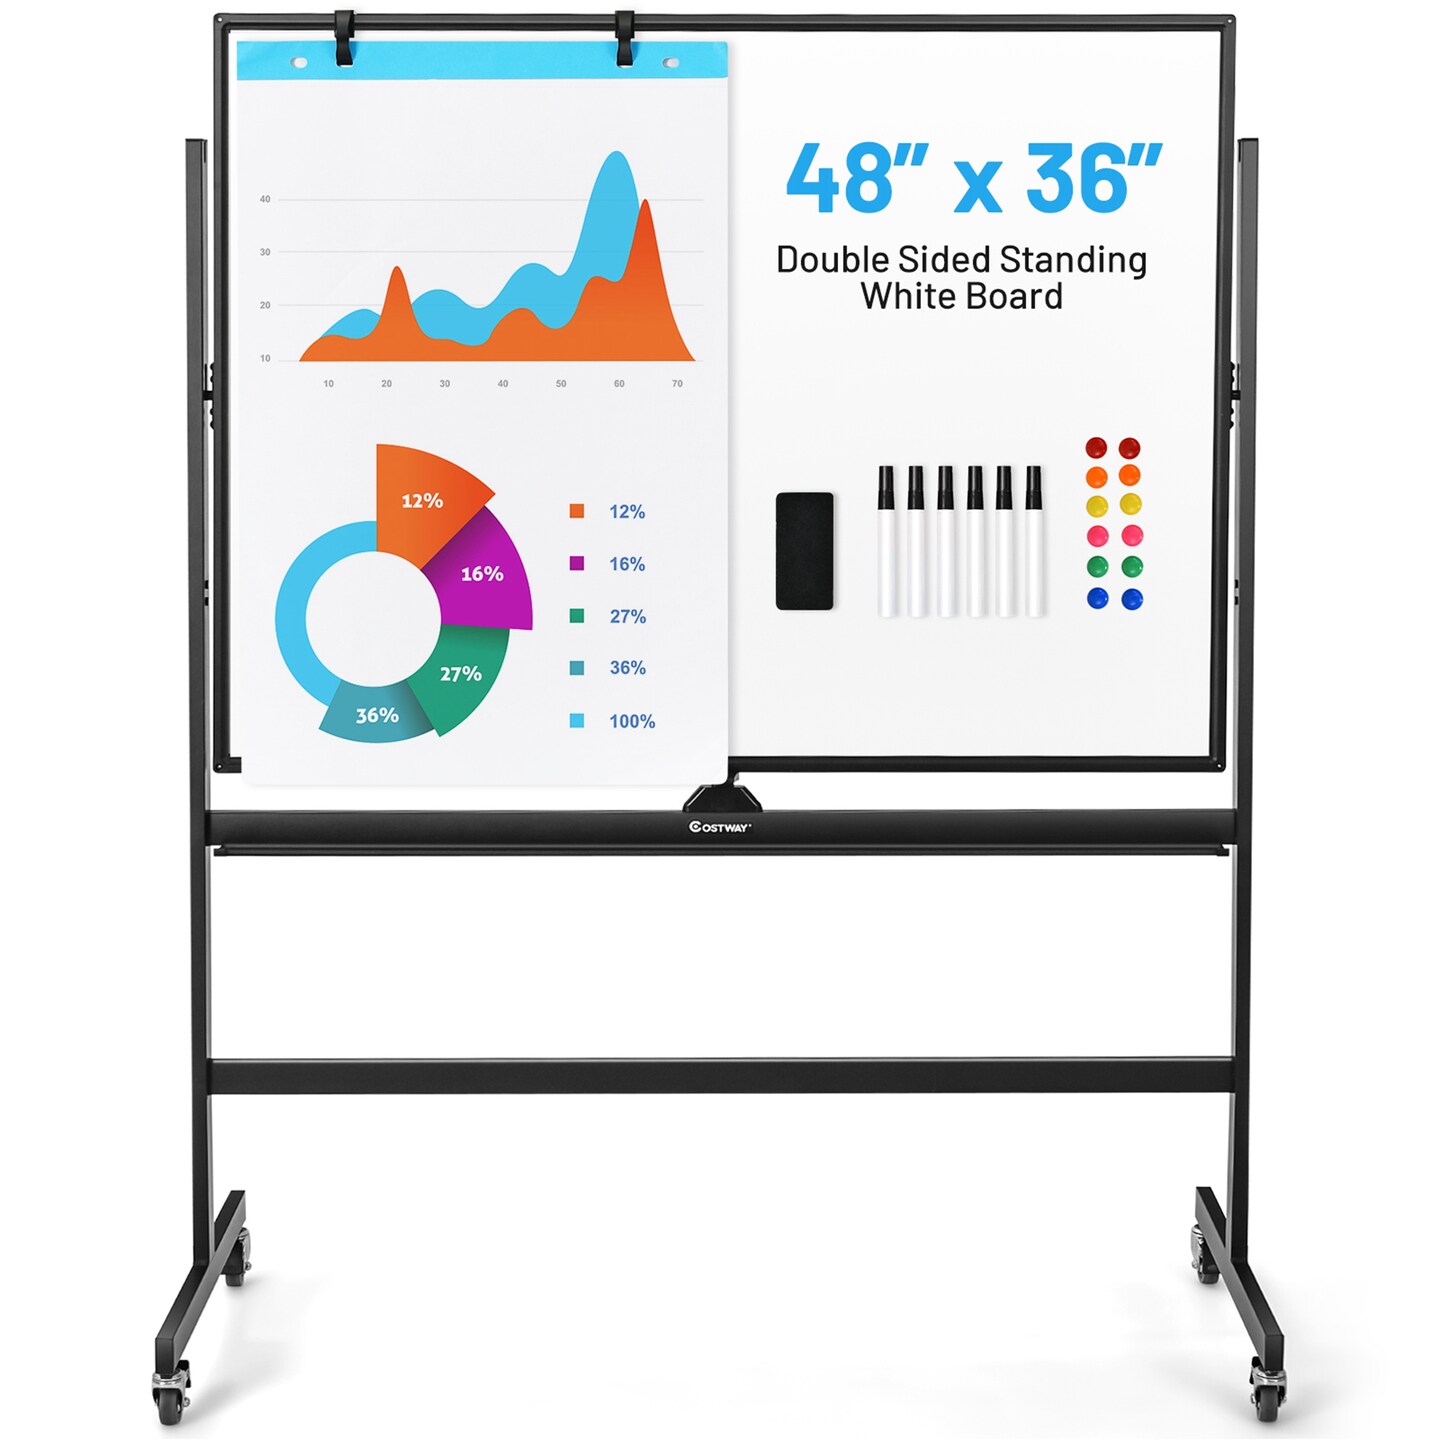 Juvale Small Double Sided Easel, Black Chalkboard & White Dry Erase Boards  (5.5 x 7.8 x 1 in)